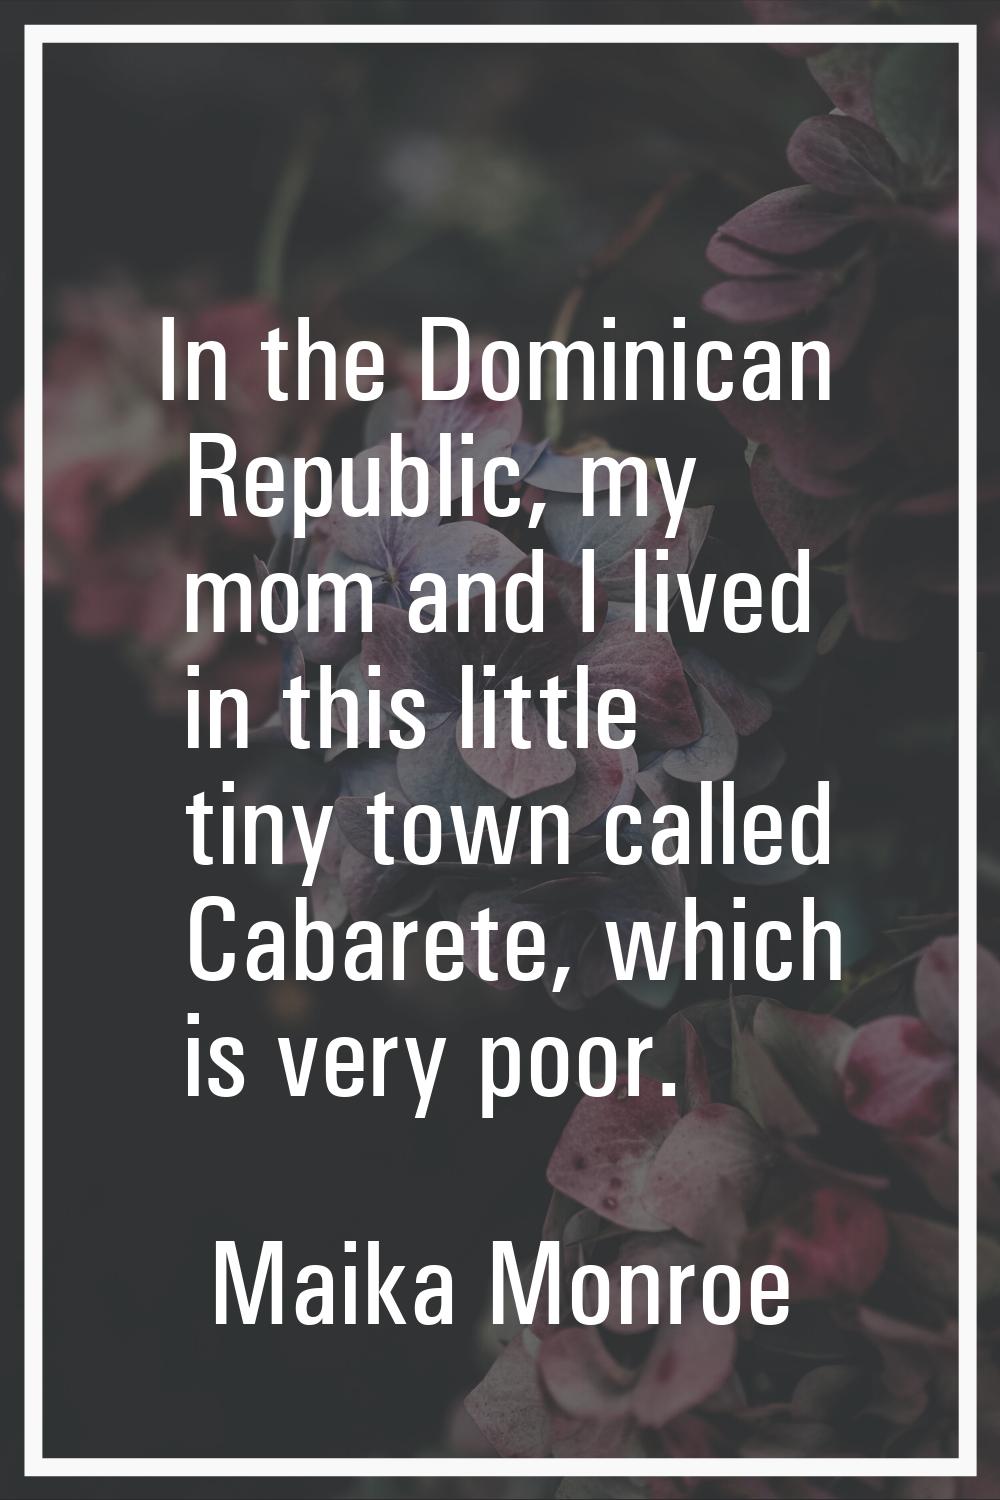 In the Dominican Republic, my mom and I lived in this little tiny town called Cabarete, which is ve